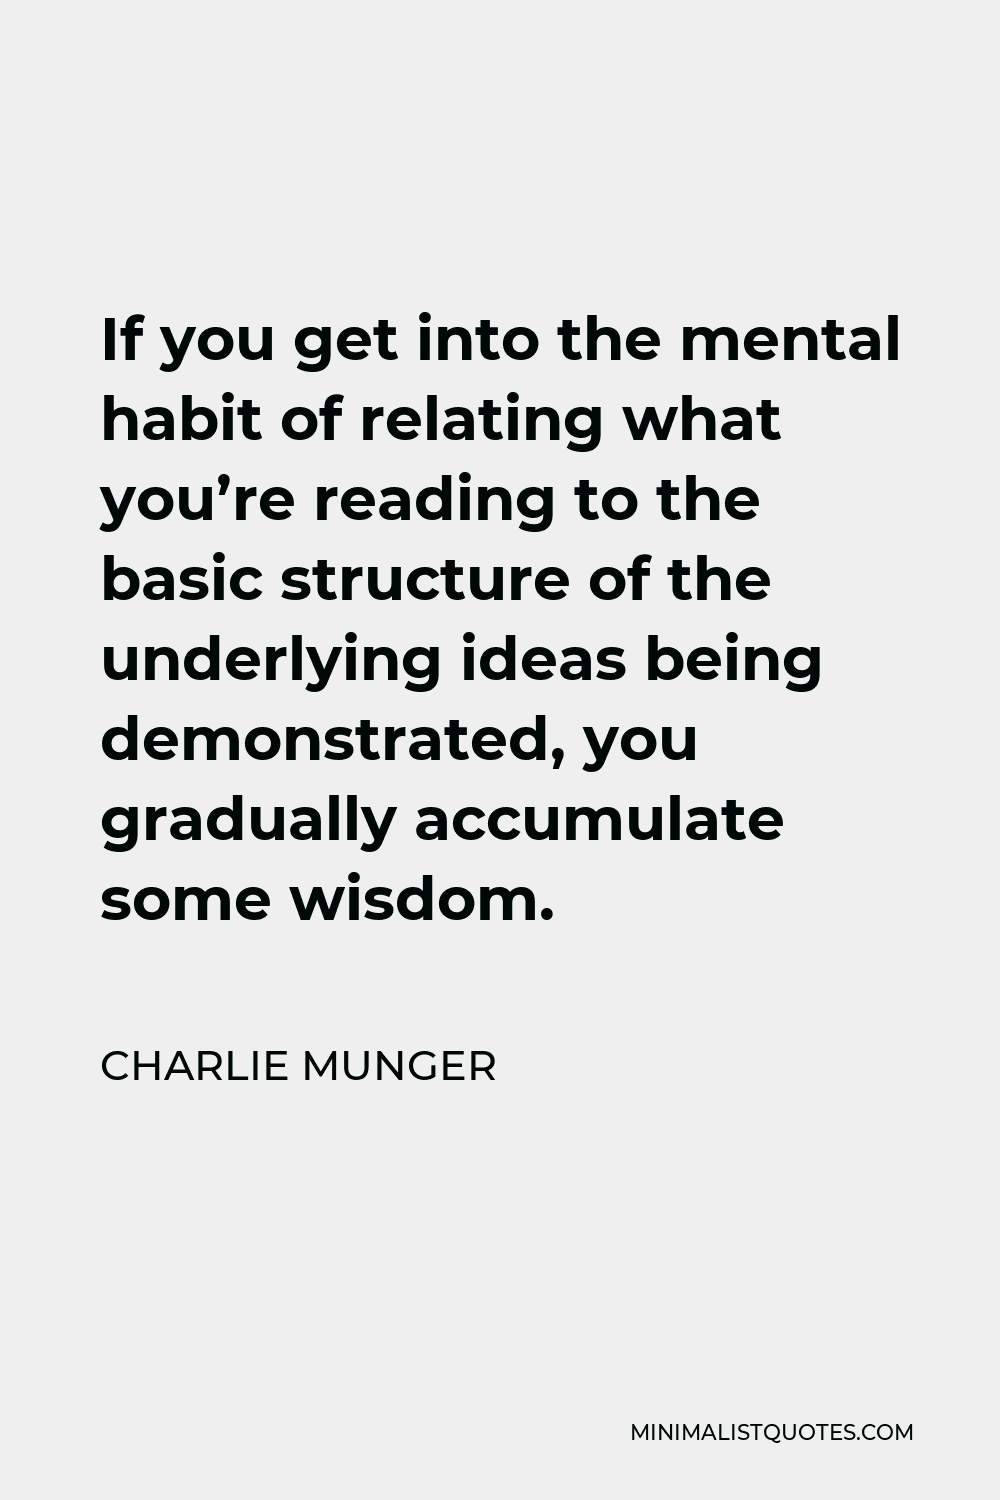 Charlie Munger Quote - If you get into the mental habit of relating what you’re reading to the basic structure of the underlying ideas being demonstrated, you gradually accumulate some wisdom.